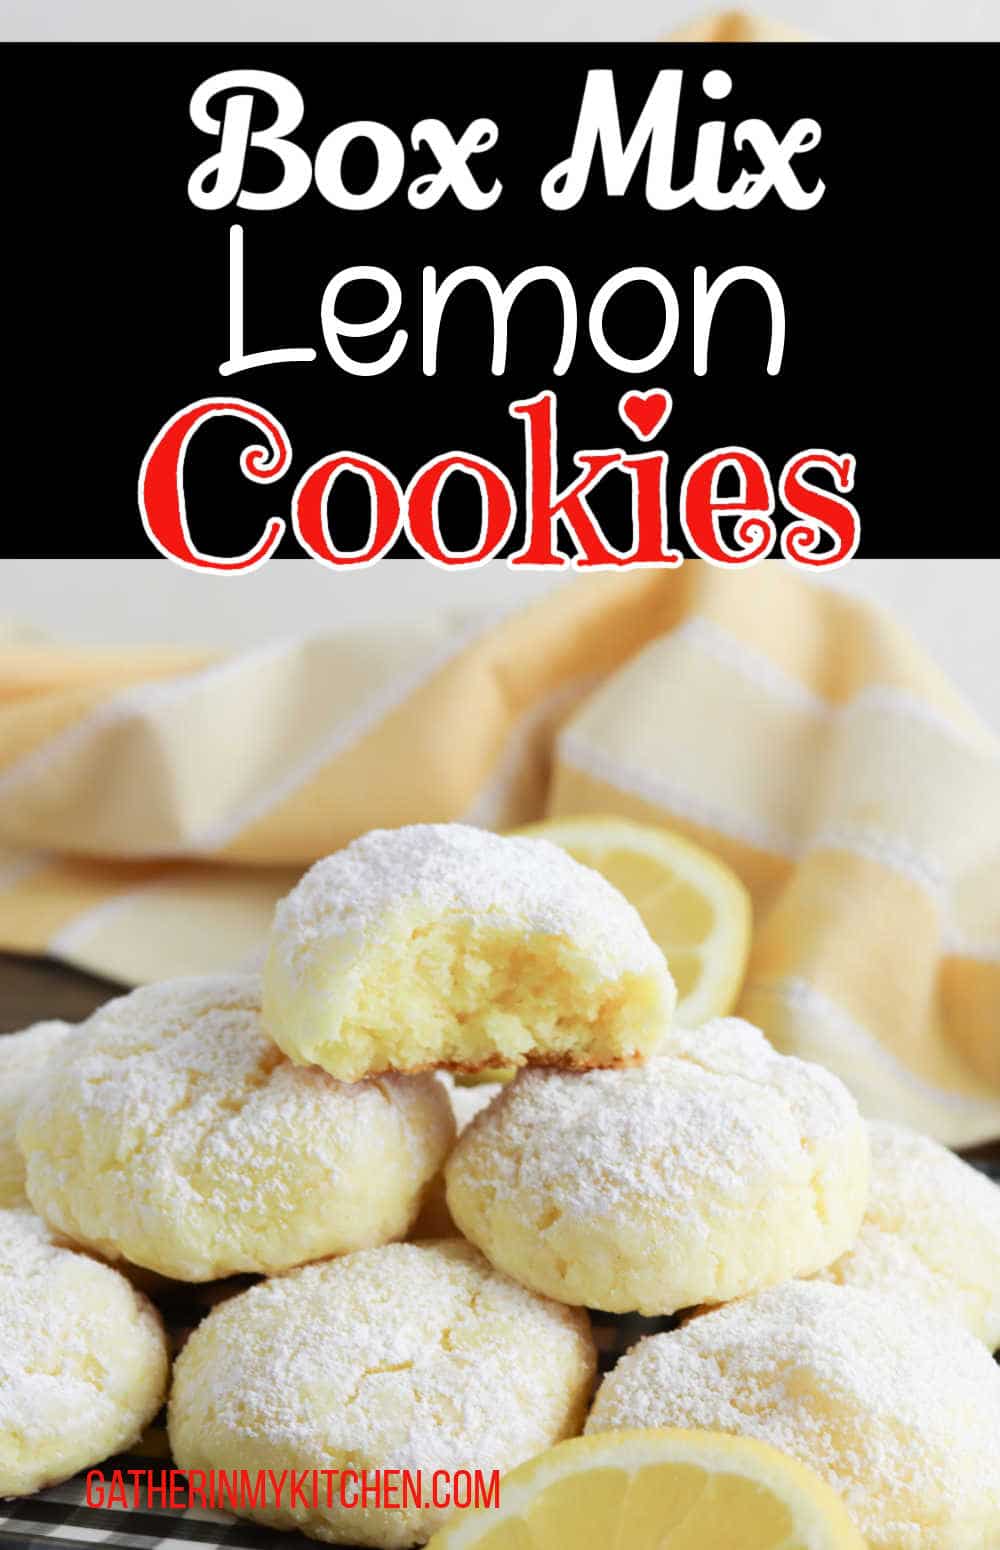 Pin Image: Top says "Box Mix Lemon Cookies", bottom has lemon cookie with a bite taken out on a stack of cookies.